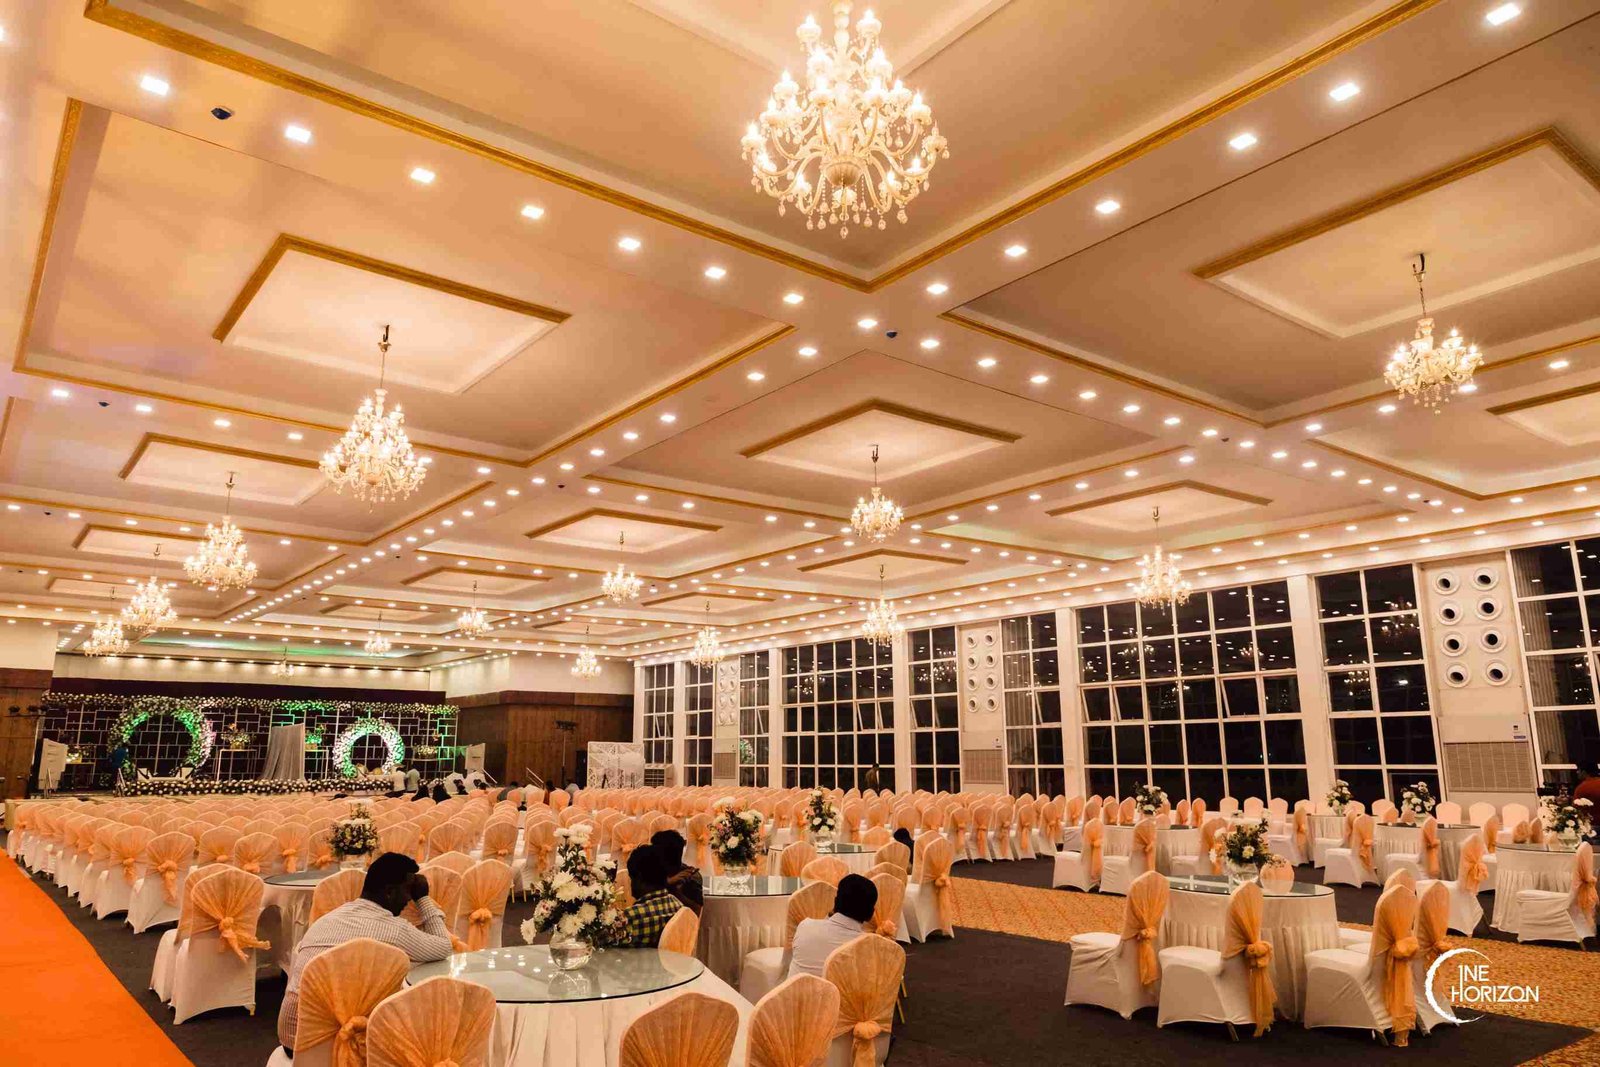 Royal Banquet Hall in White Petals, Palace Grounds wedding hall